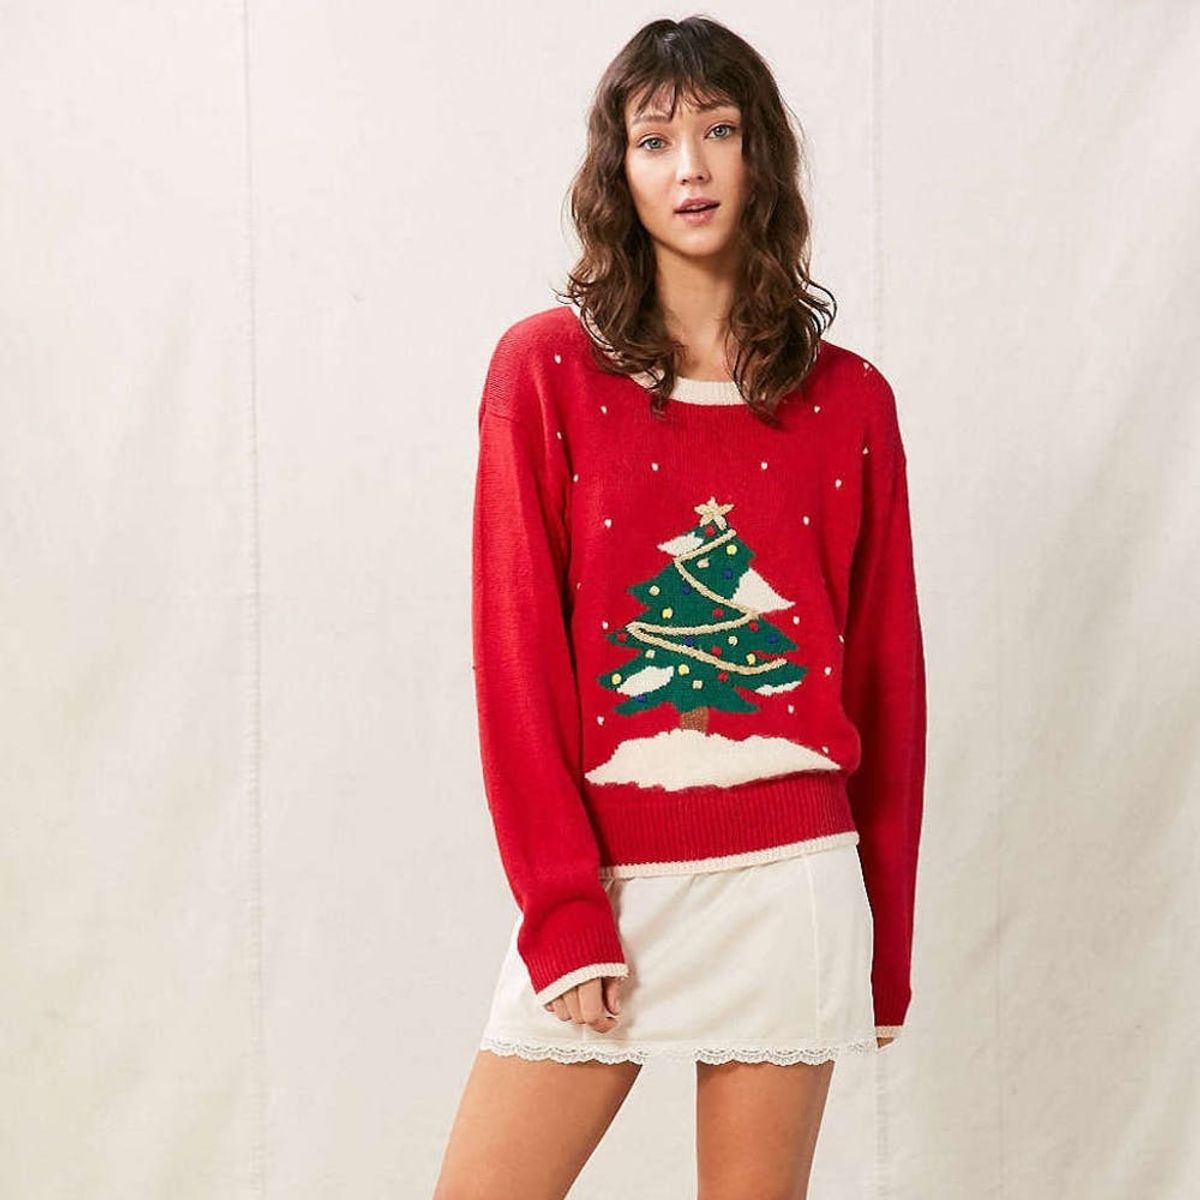 28 Festive AF Statement Pieces to Snag for an Ugly Sweater Party